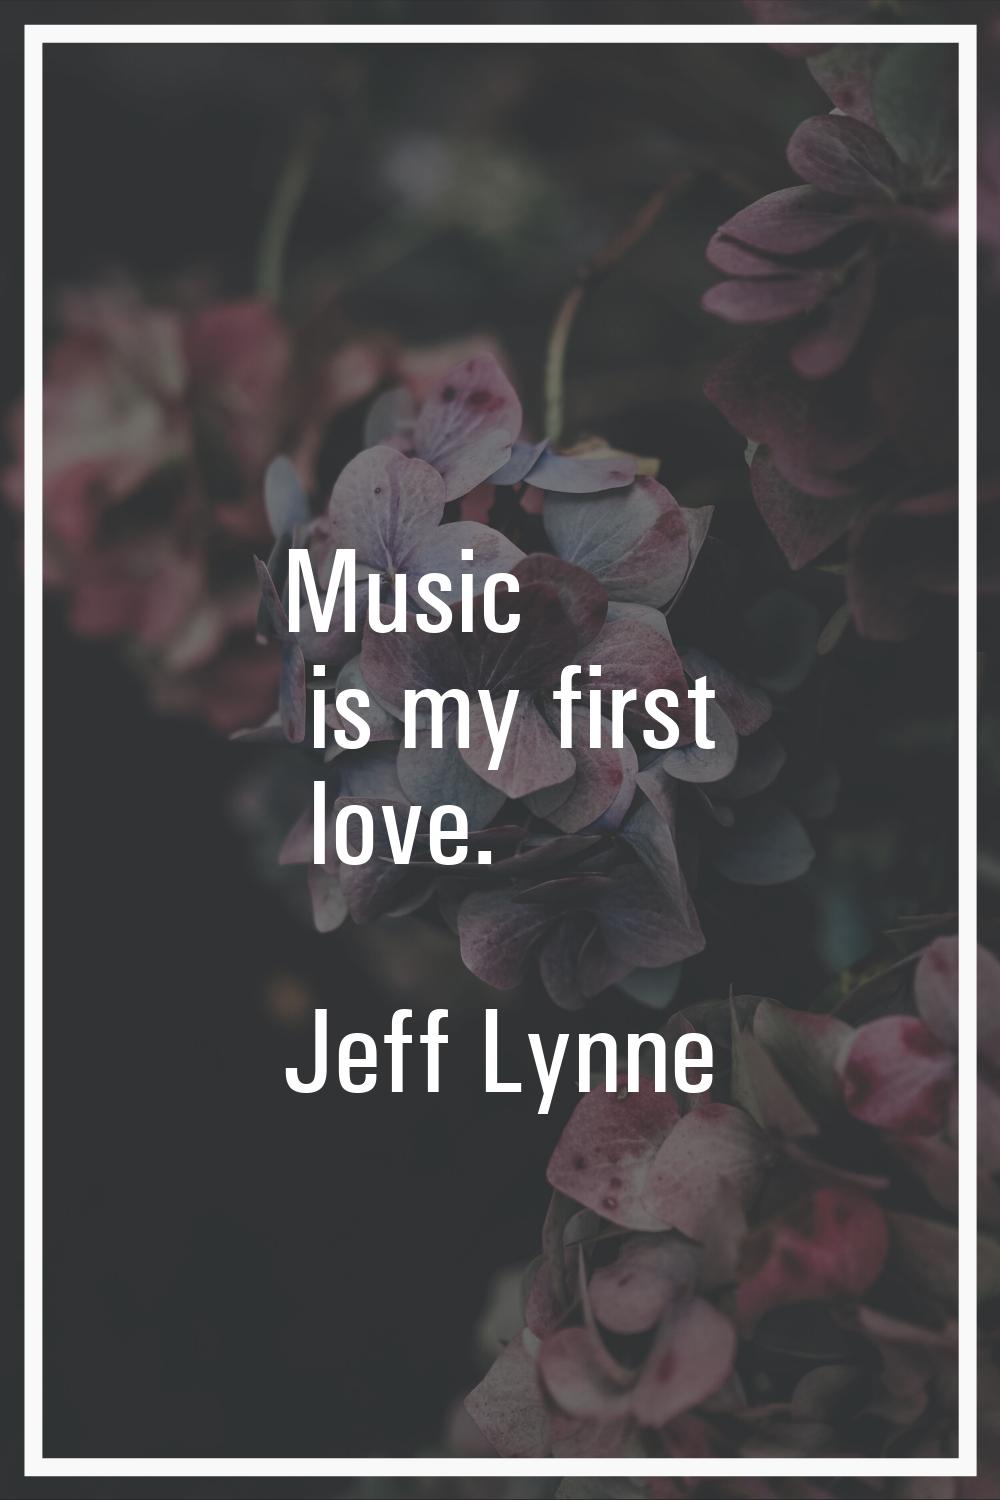 Music is my first love.